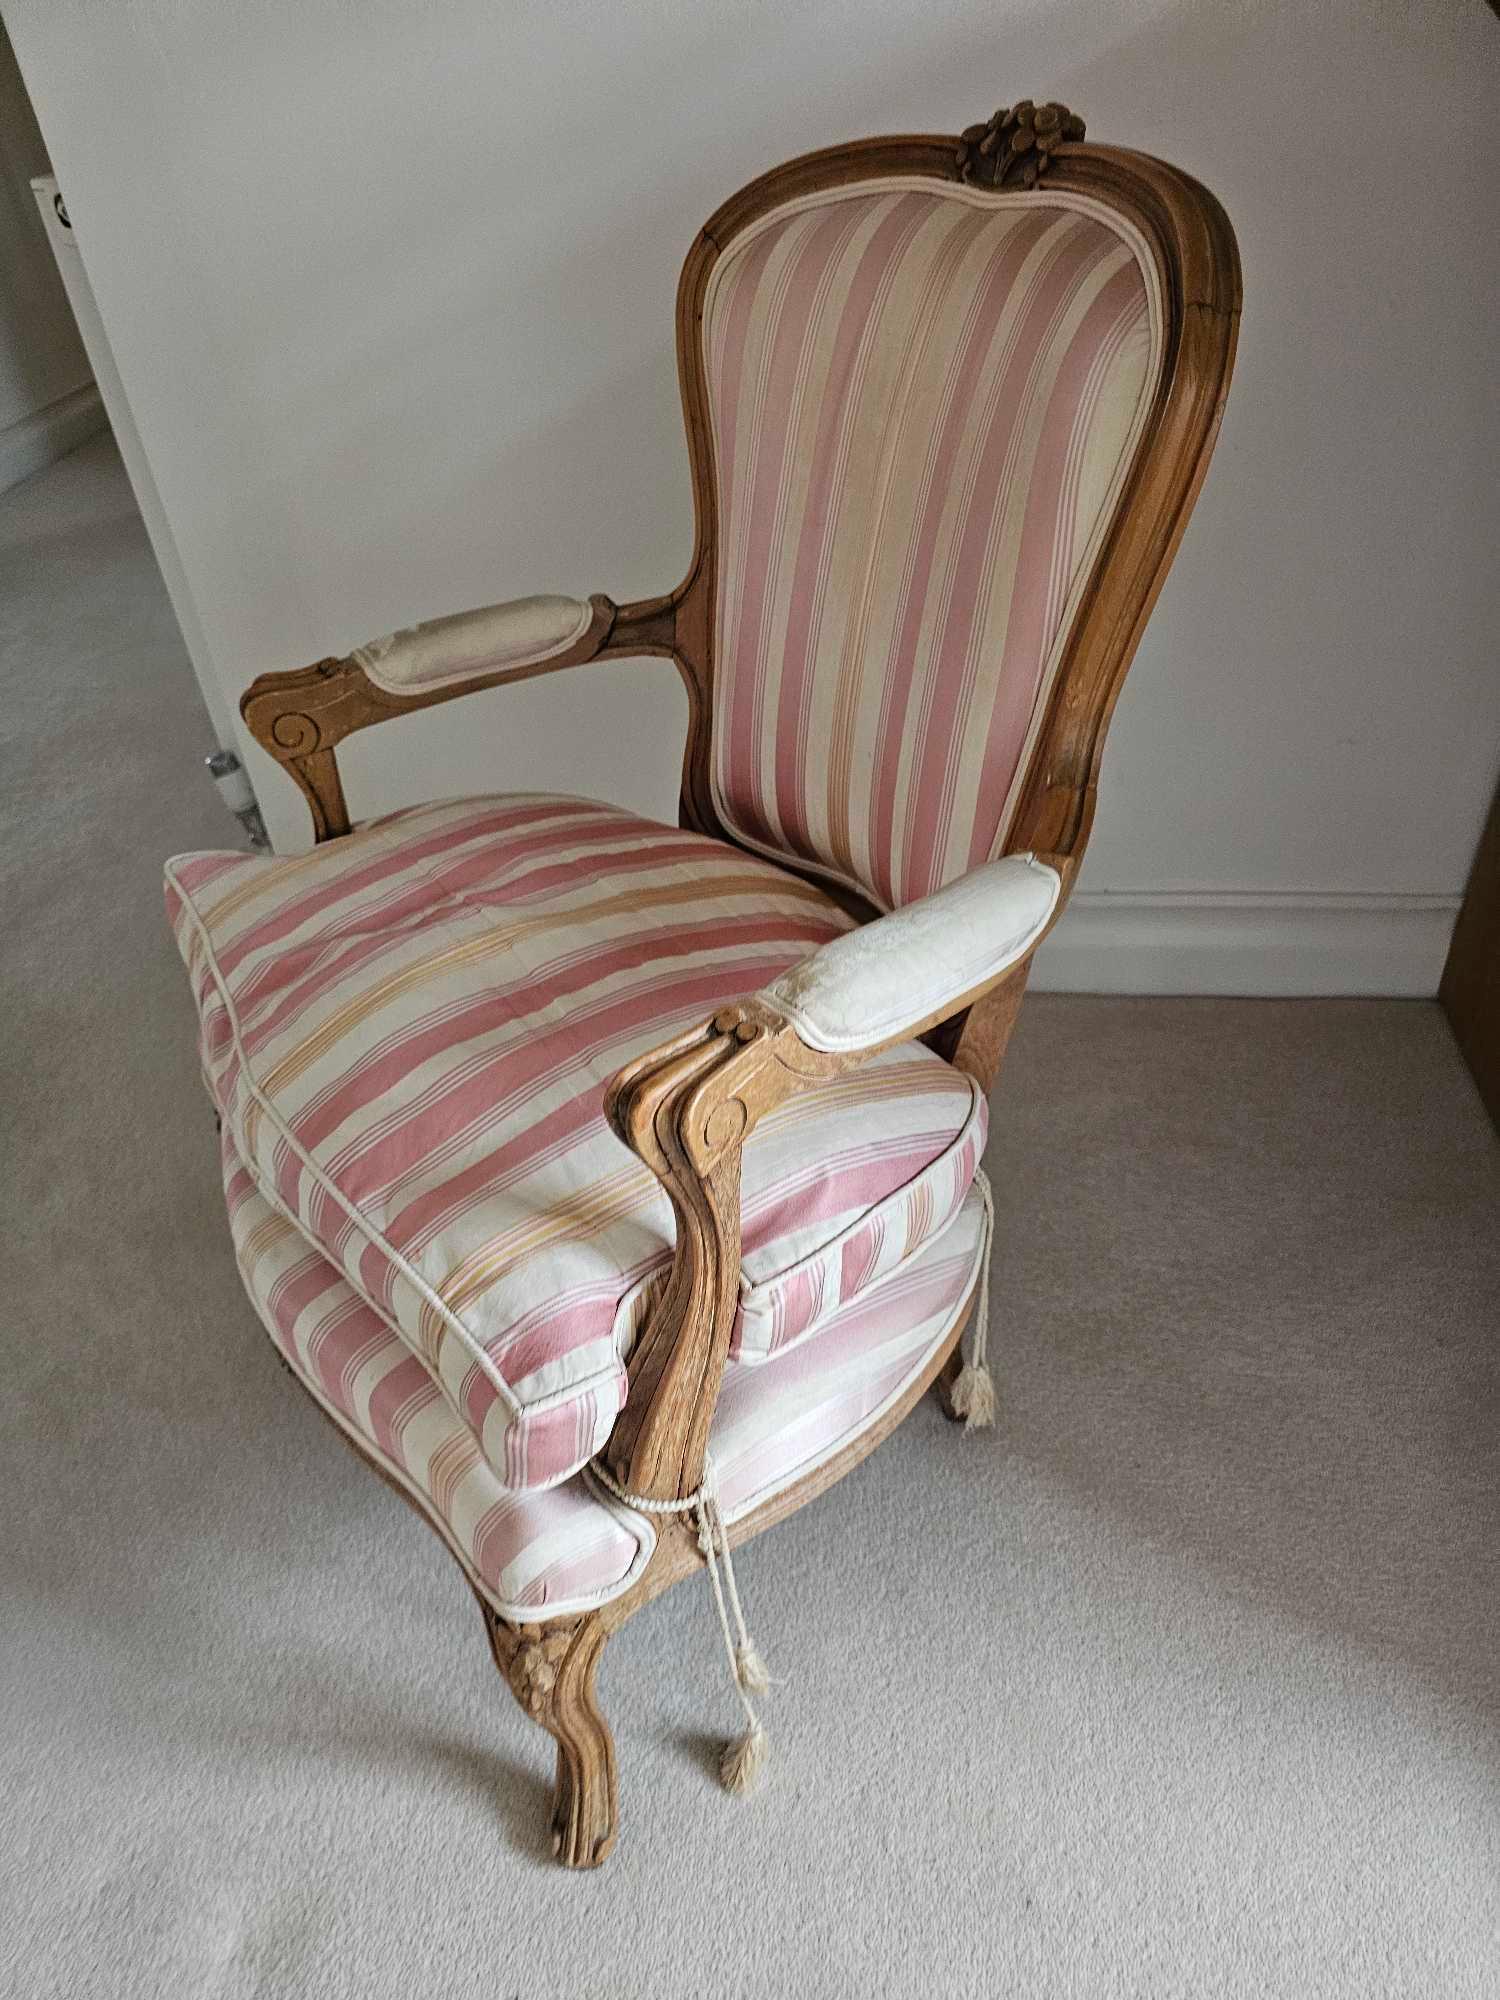 A Louis XV Style Beechwood Fauteuil The Shaped Rectangular Back With Floral Cresting, Striped - Image 3 of 5